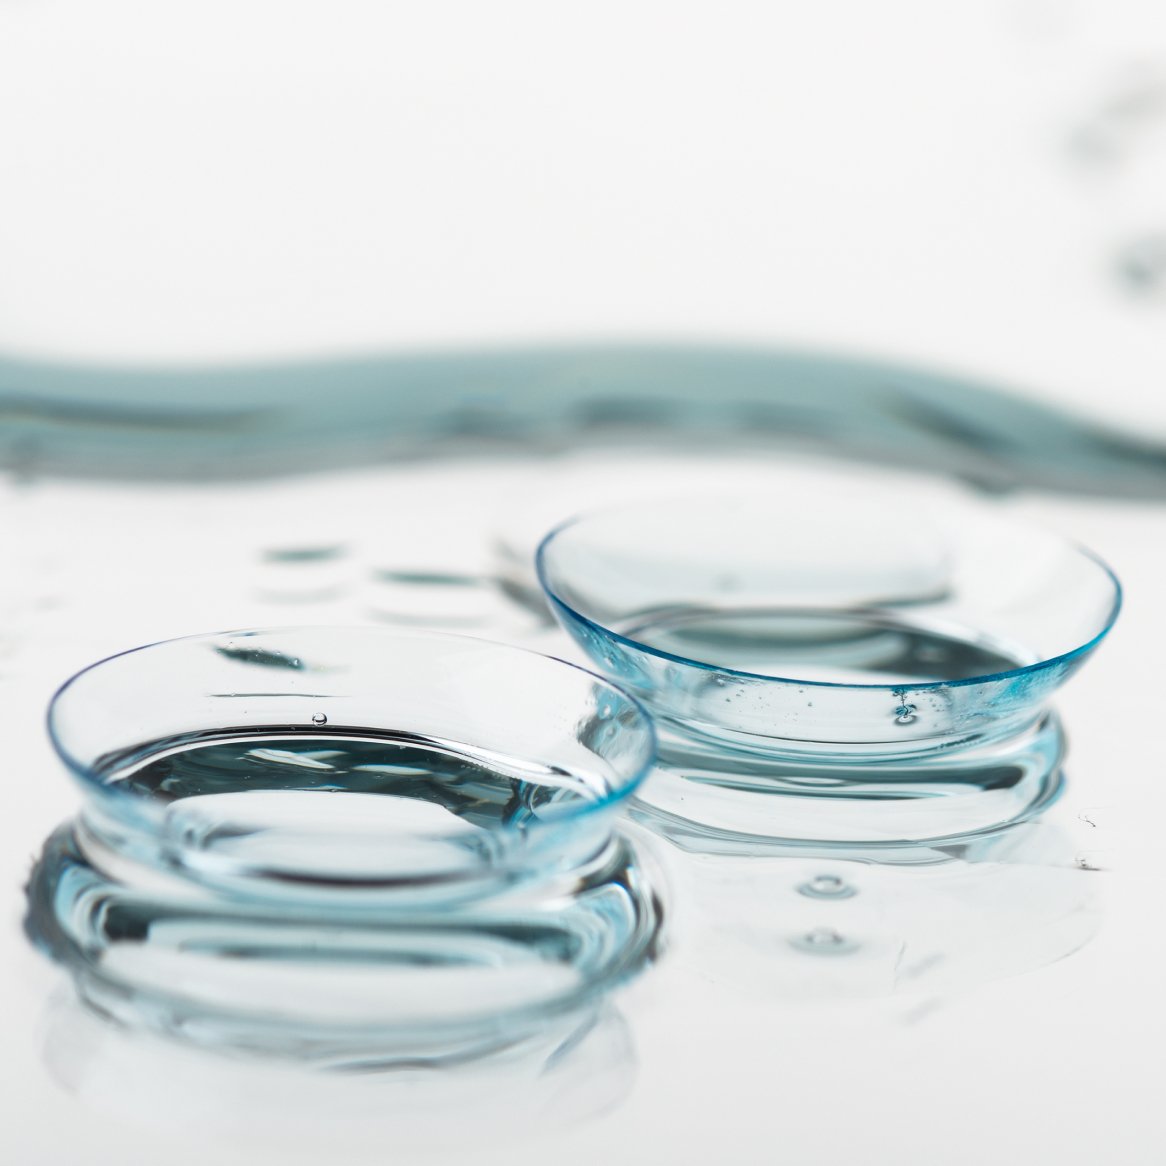 Close-up image of a pair of contact lenses